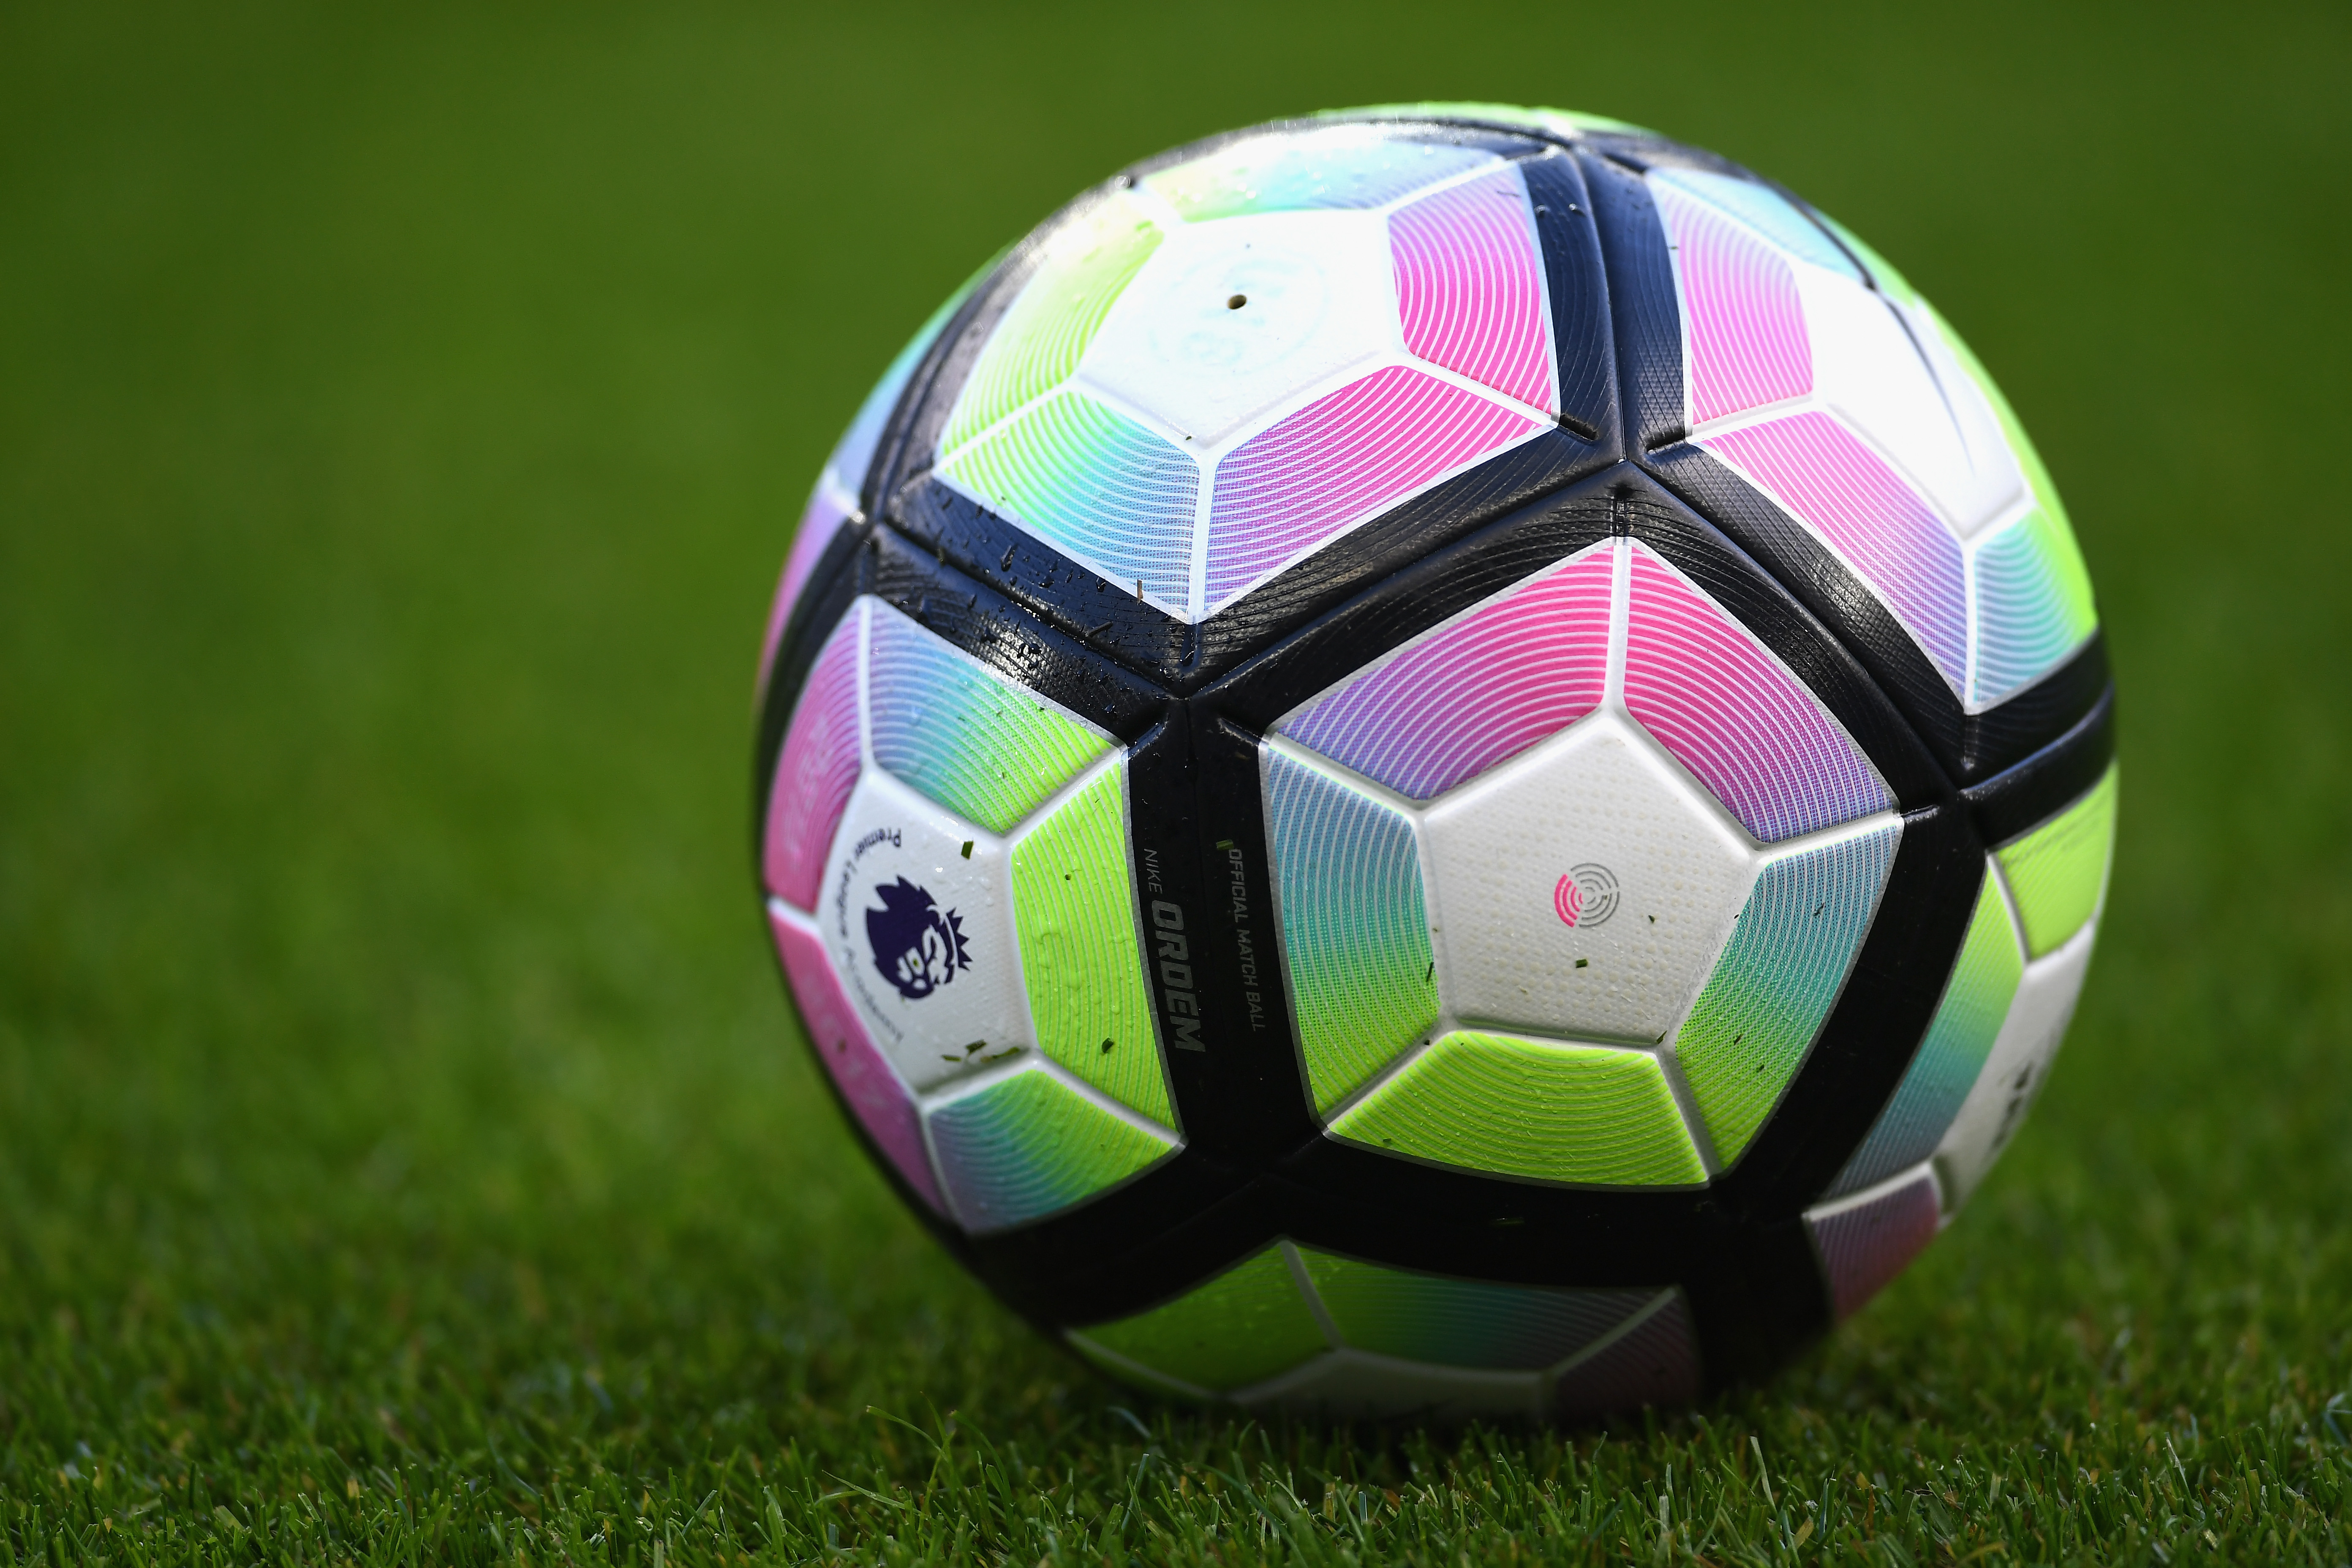 Premier League reveal 'winter ball', which is no more visible than